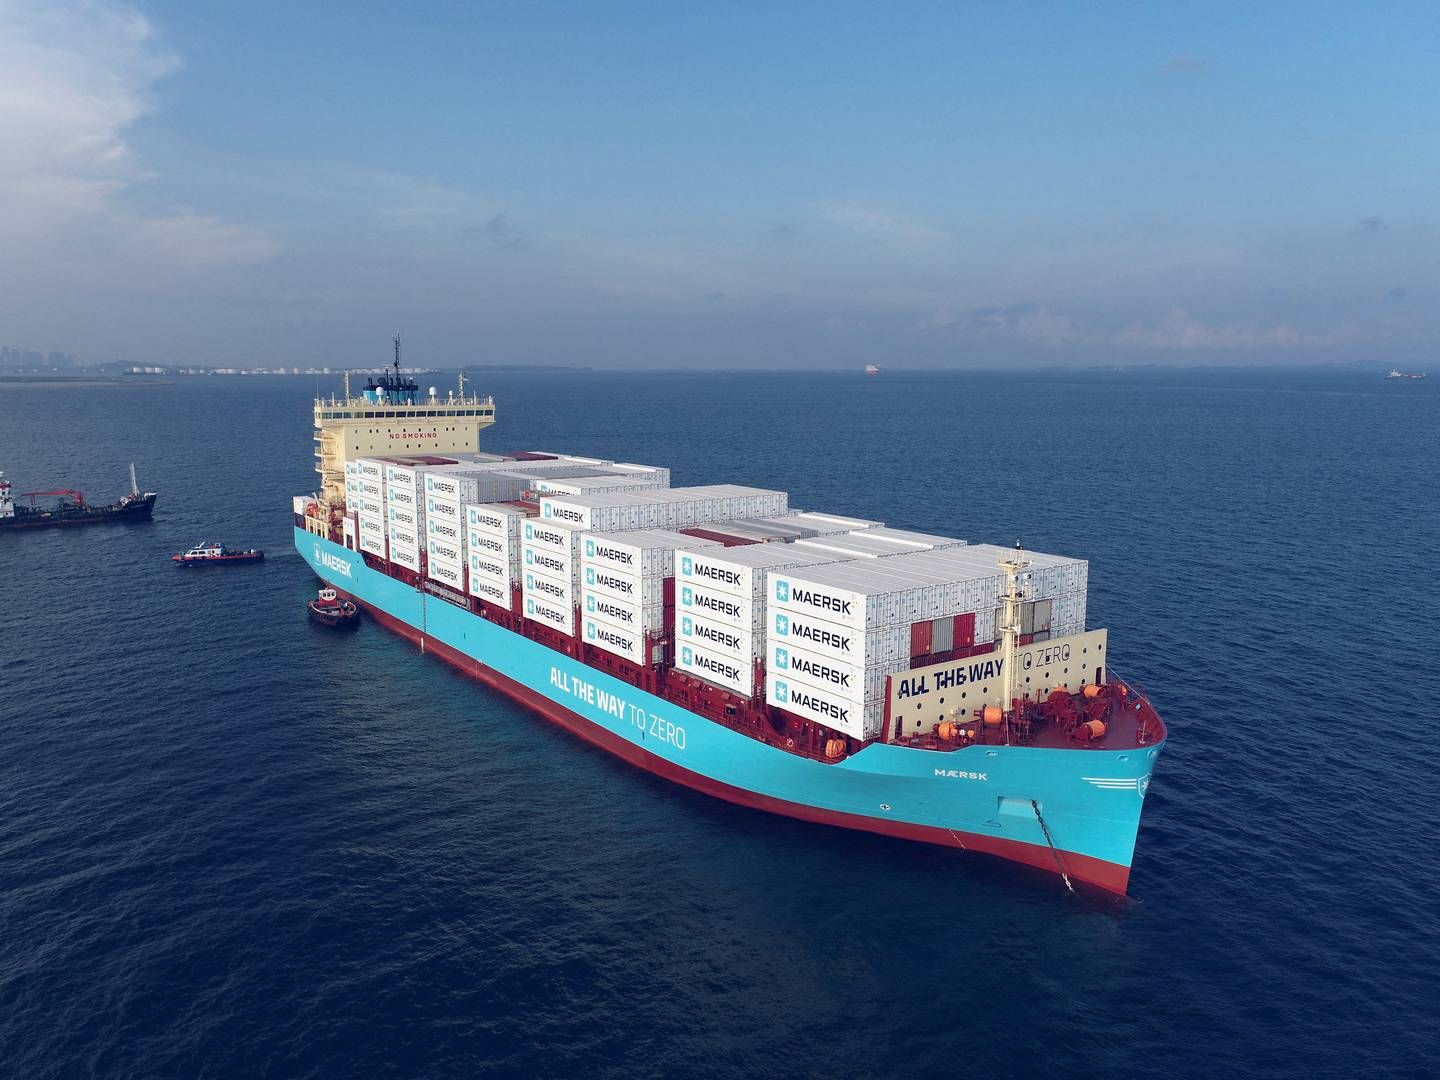 Maersk's new methanol-powered feeder ship is on its maiden voyage and will arrive in Copenhagen later in September. | Photo: Maersk/Reuters/Ritzau Scanpix